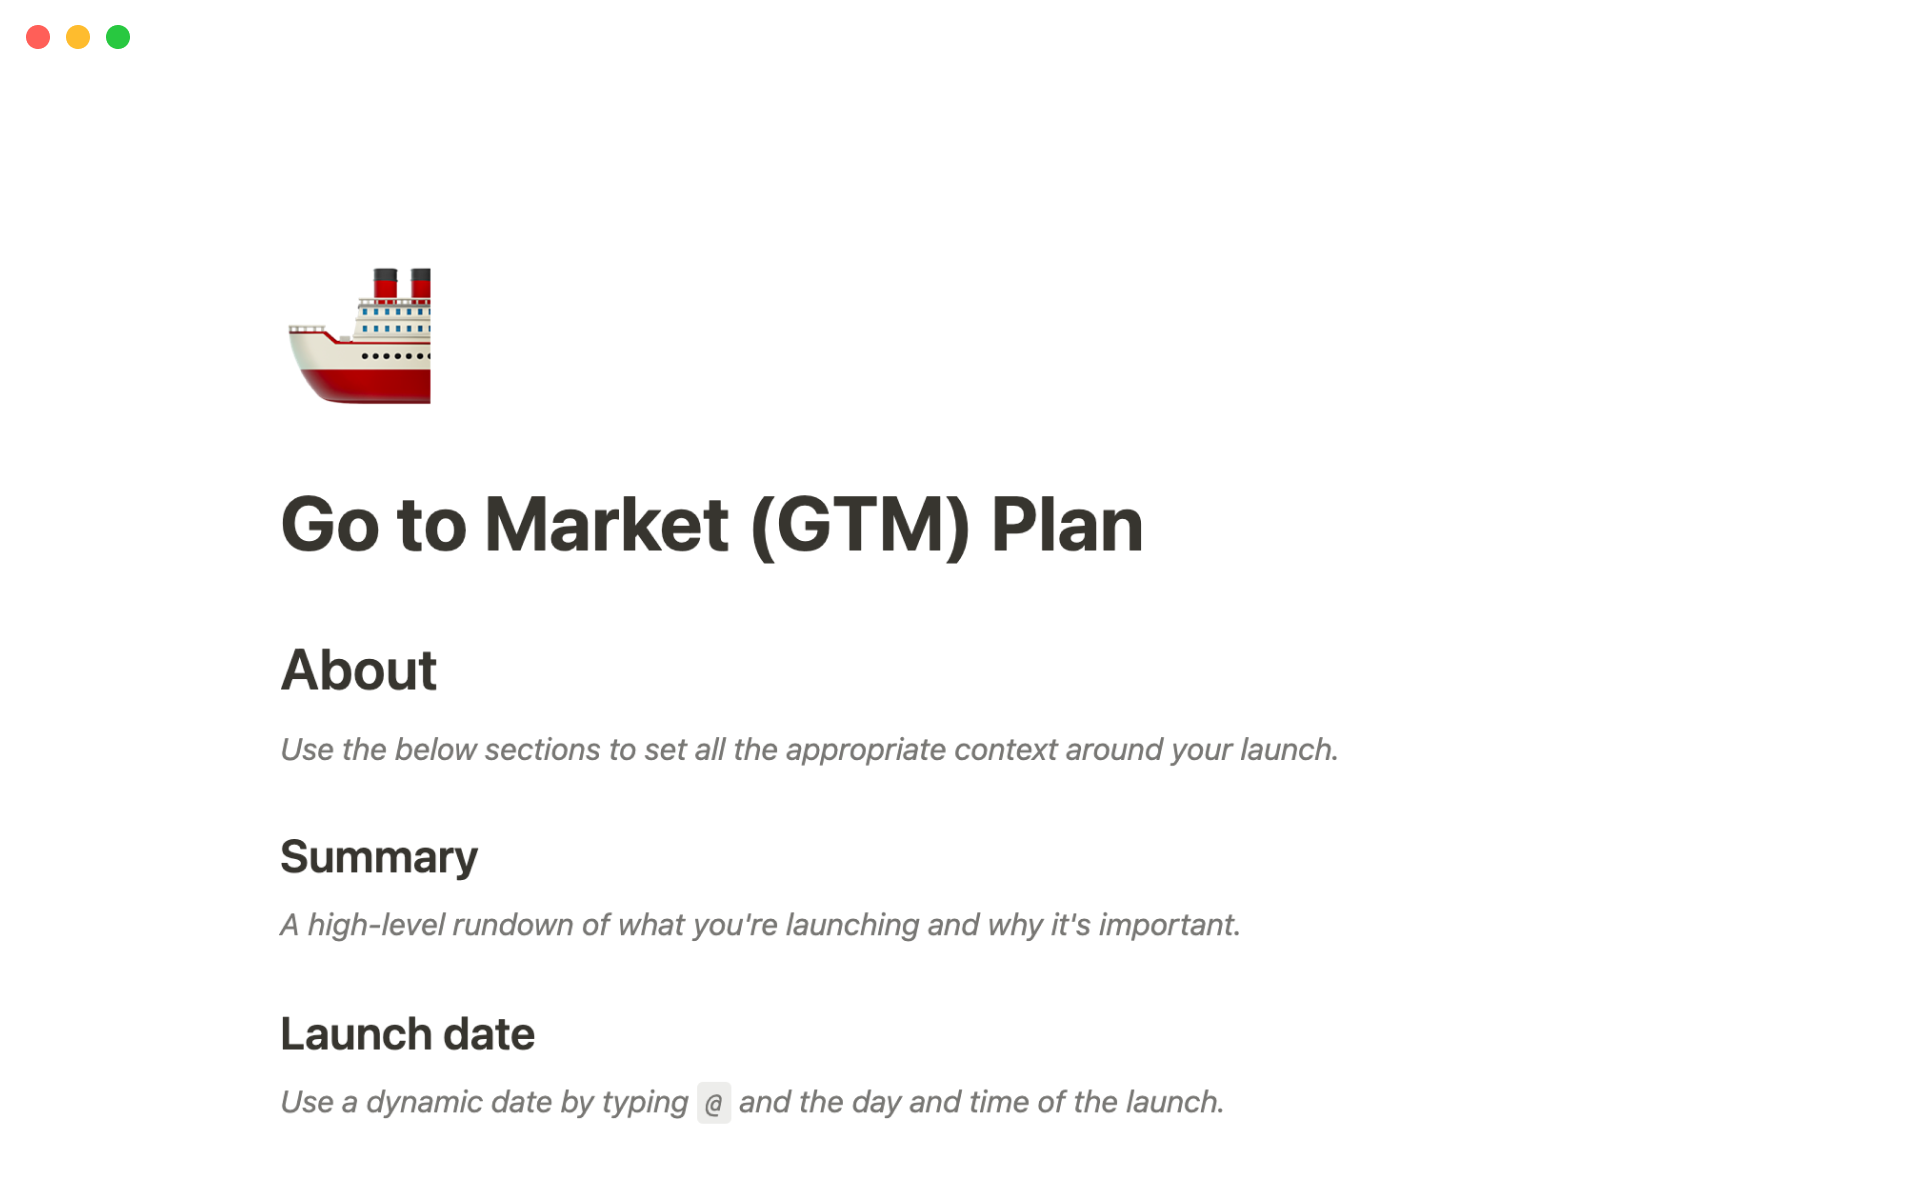 The desktop image for the Go to market (GTM) plan template